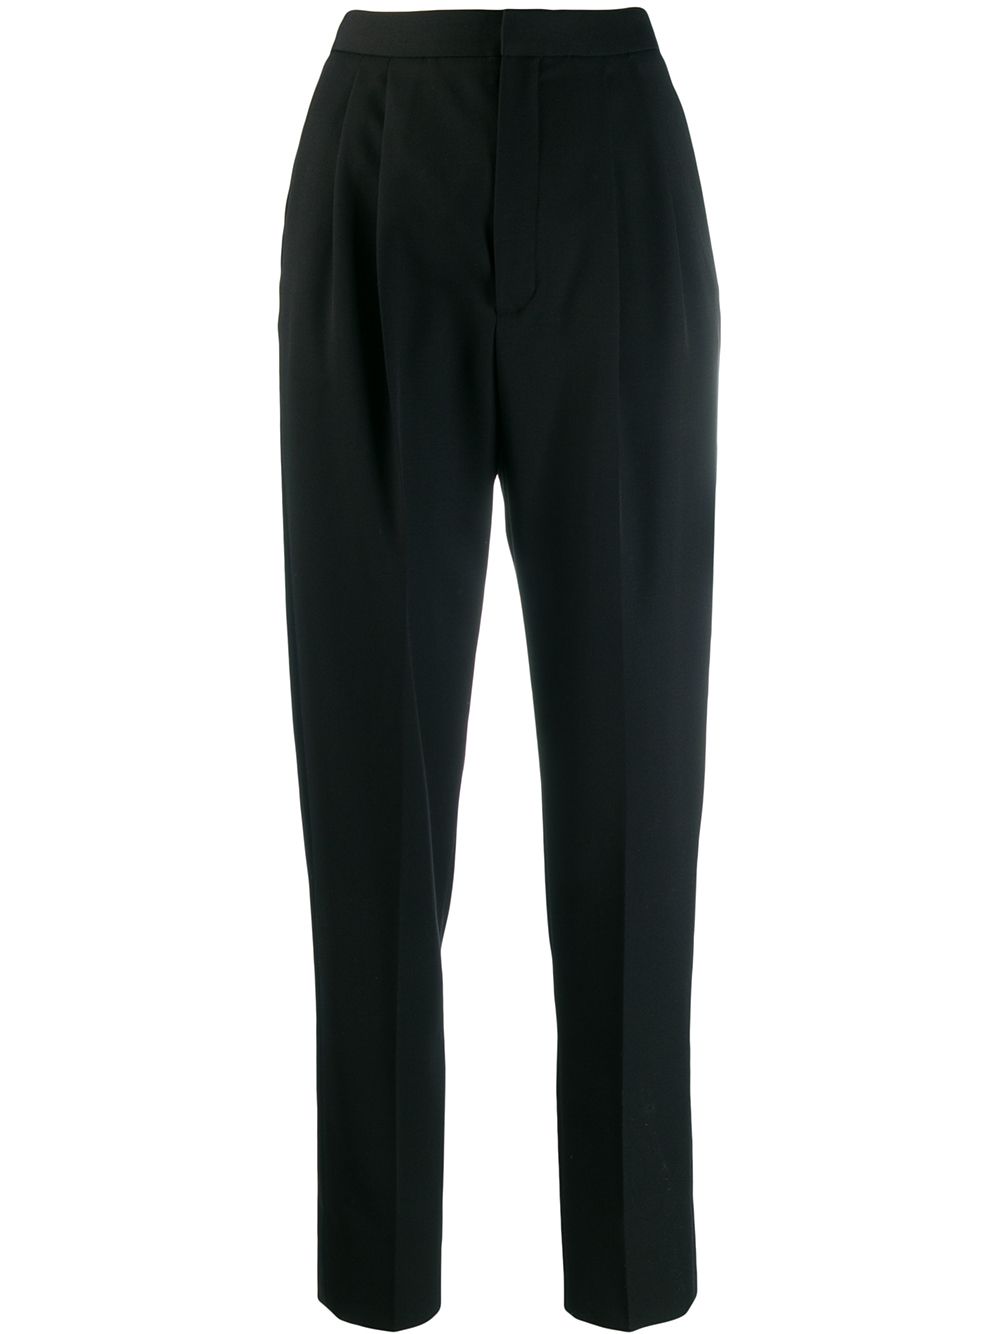 Image 1 of Saint Laurent tapered tailored trousers